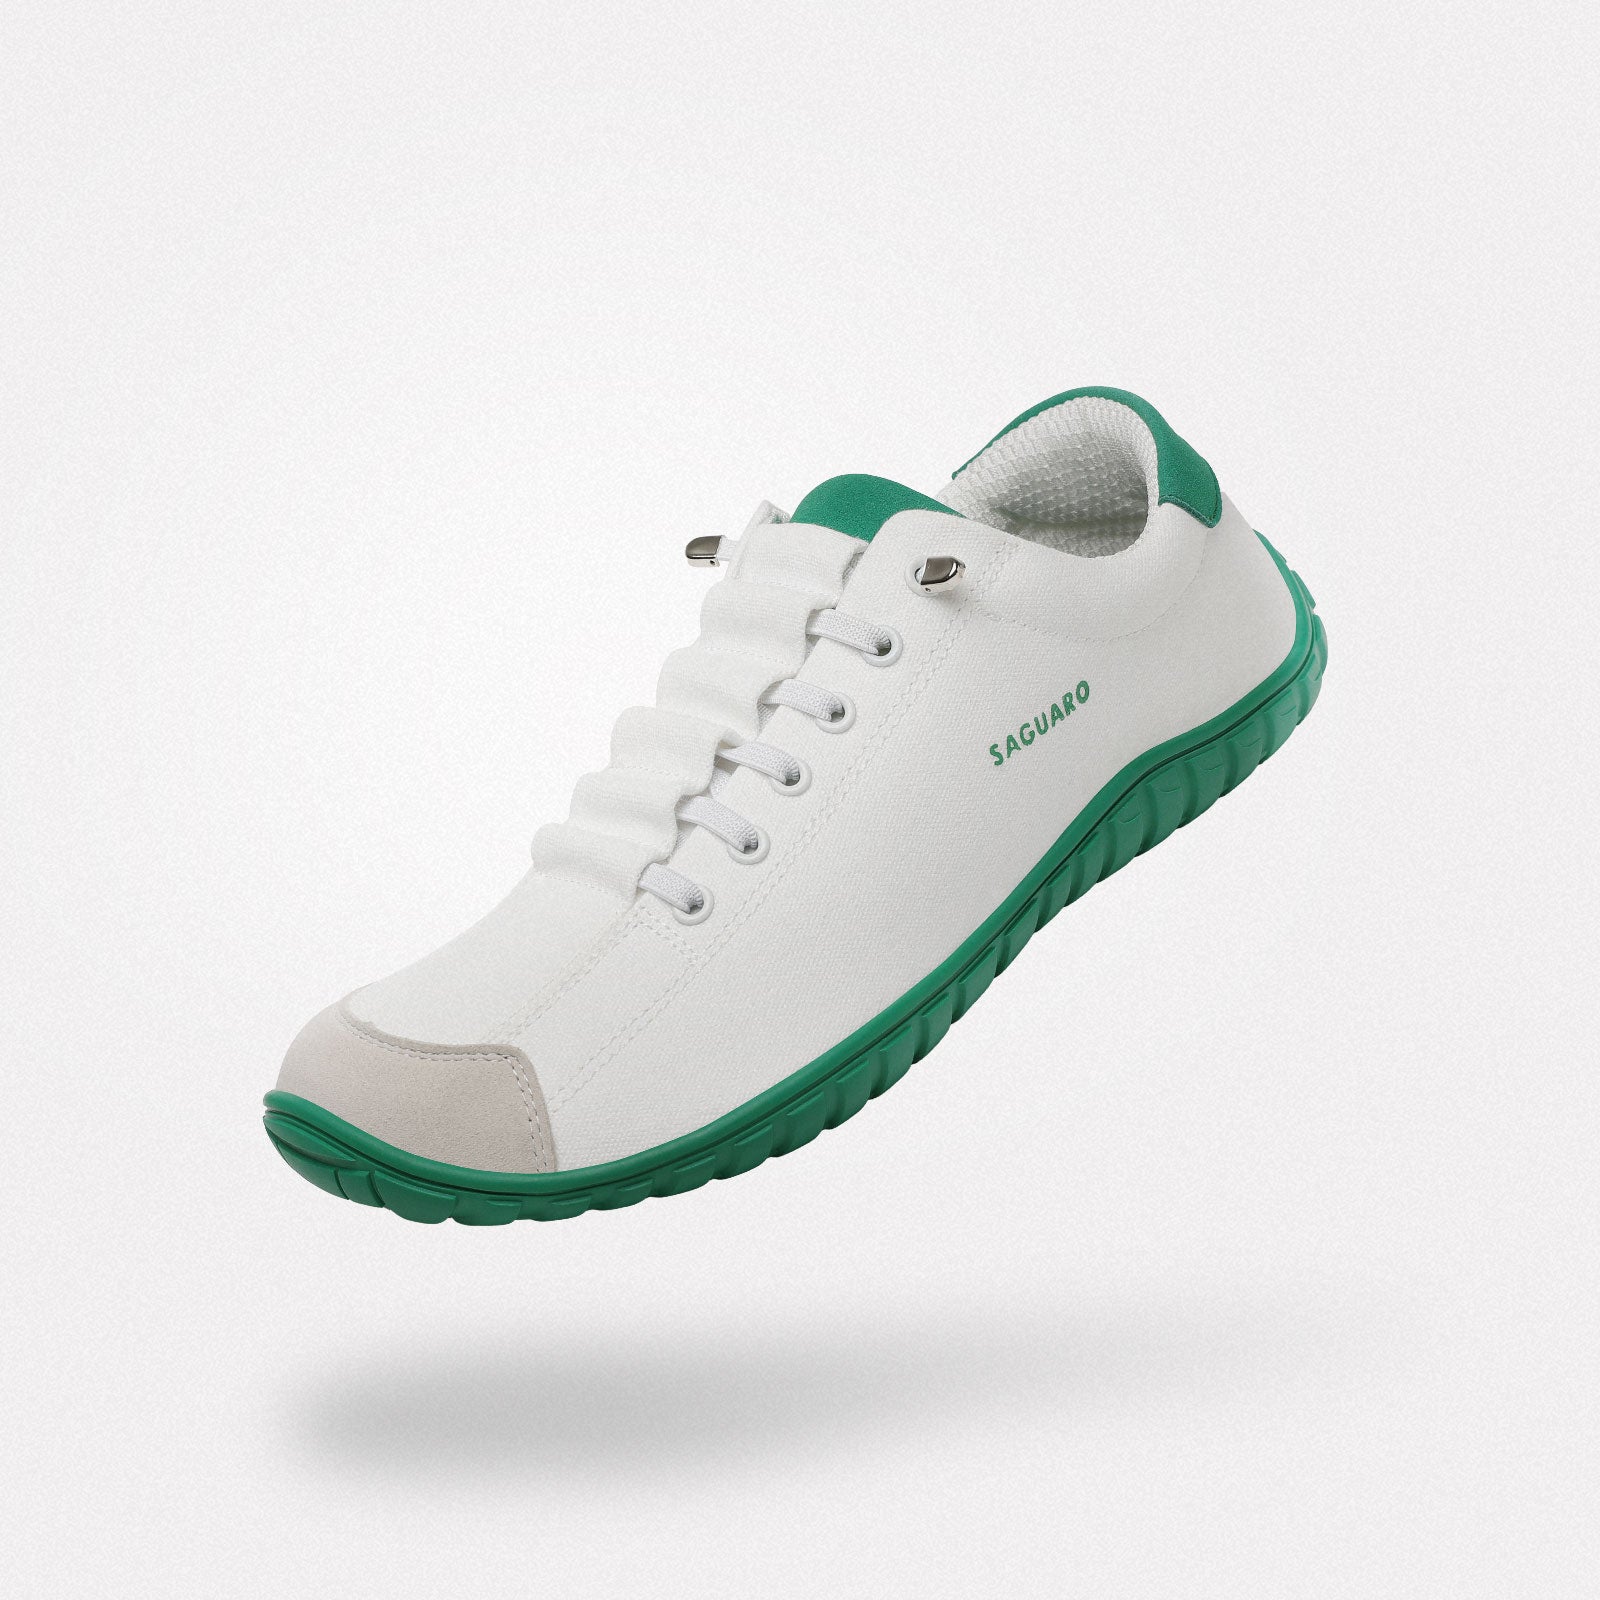 Relax IV - Casual Barefoot Shoes - Keep Unrestrained - SAGUARO®